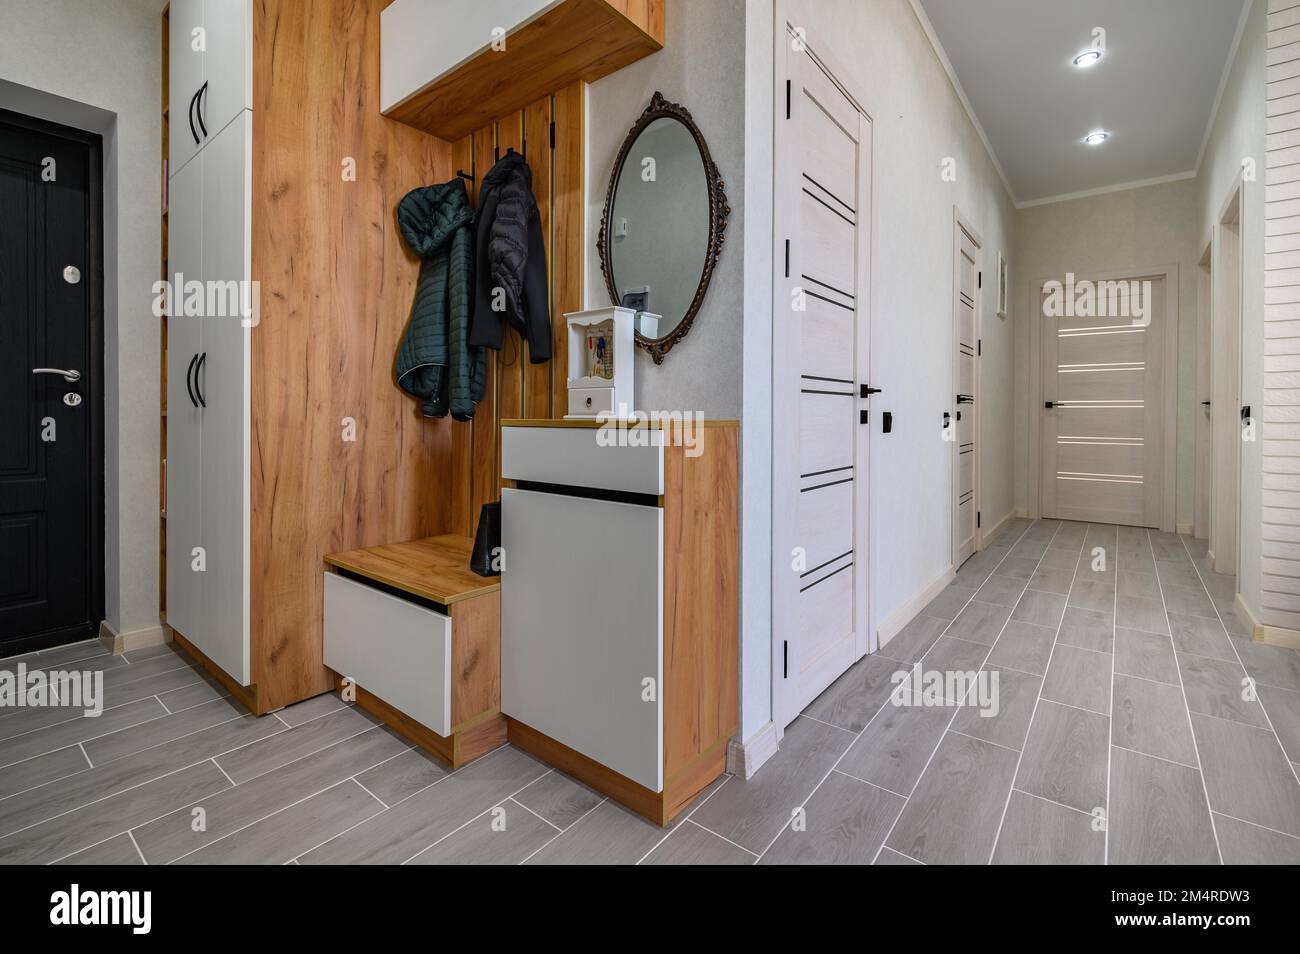 Small entrance hallway interior with shoe storage, hanger stand and mirror Stock Photo